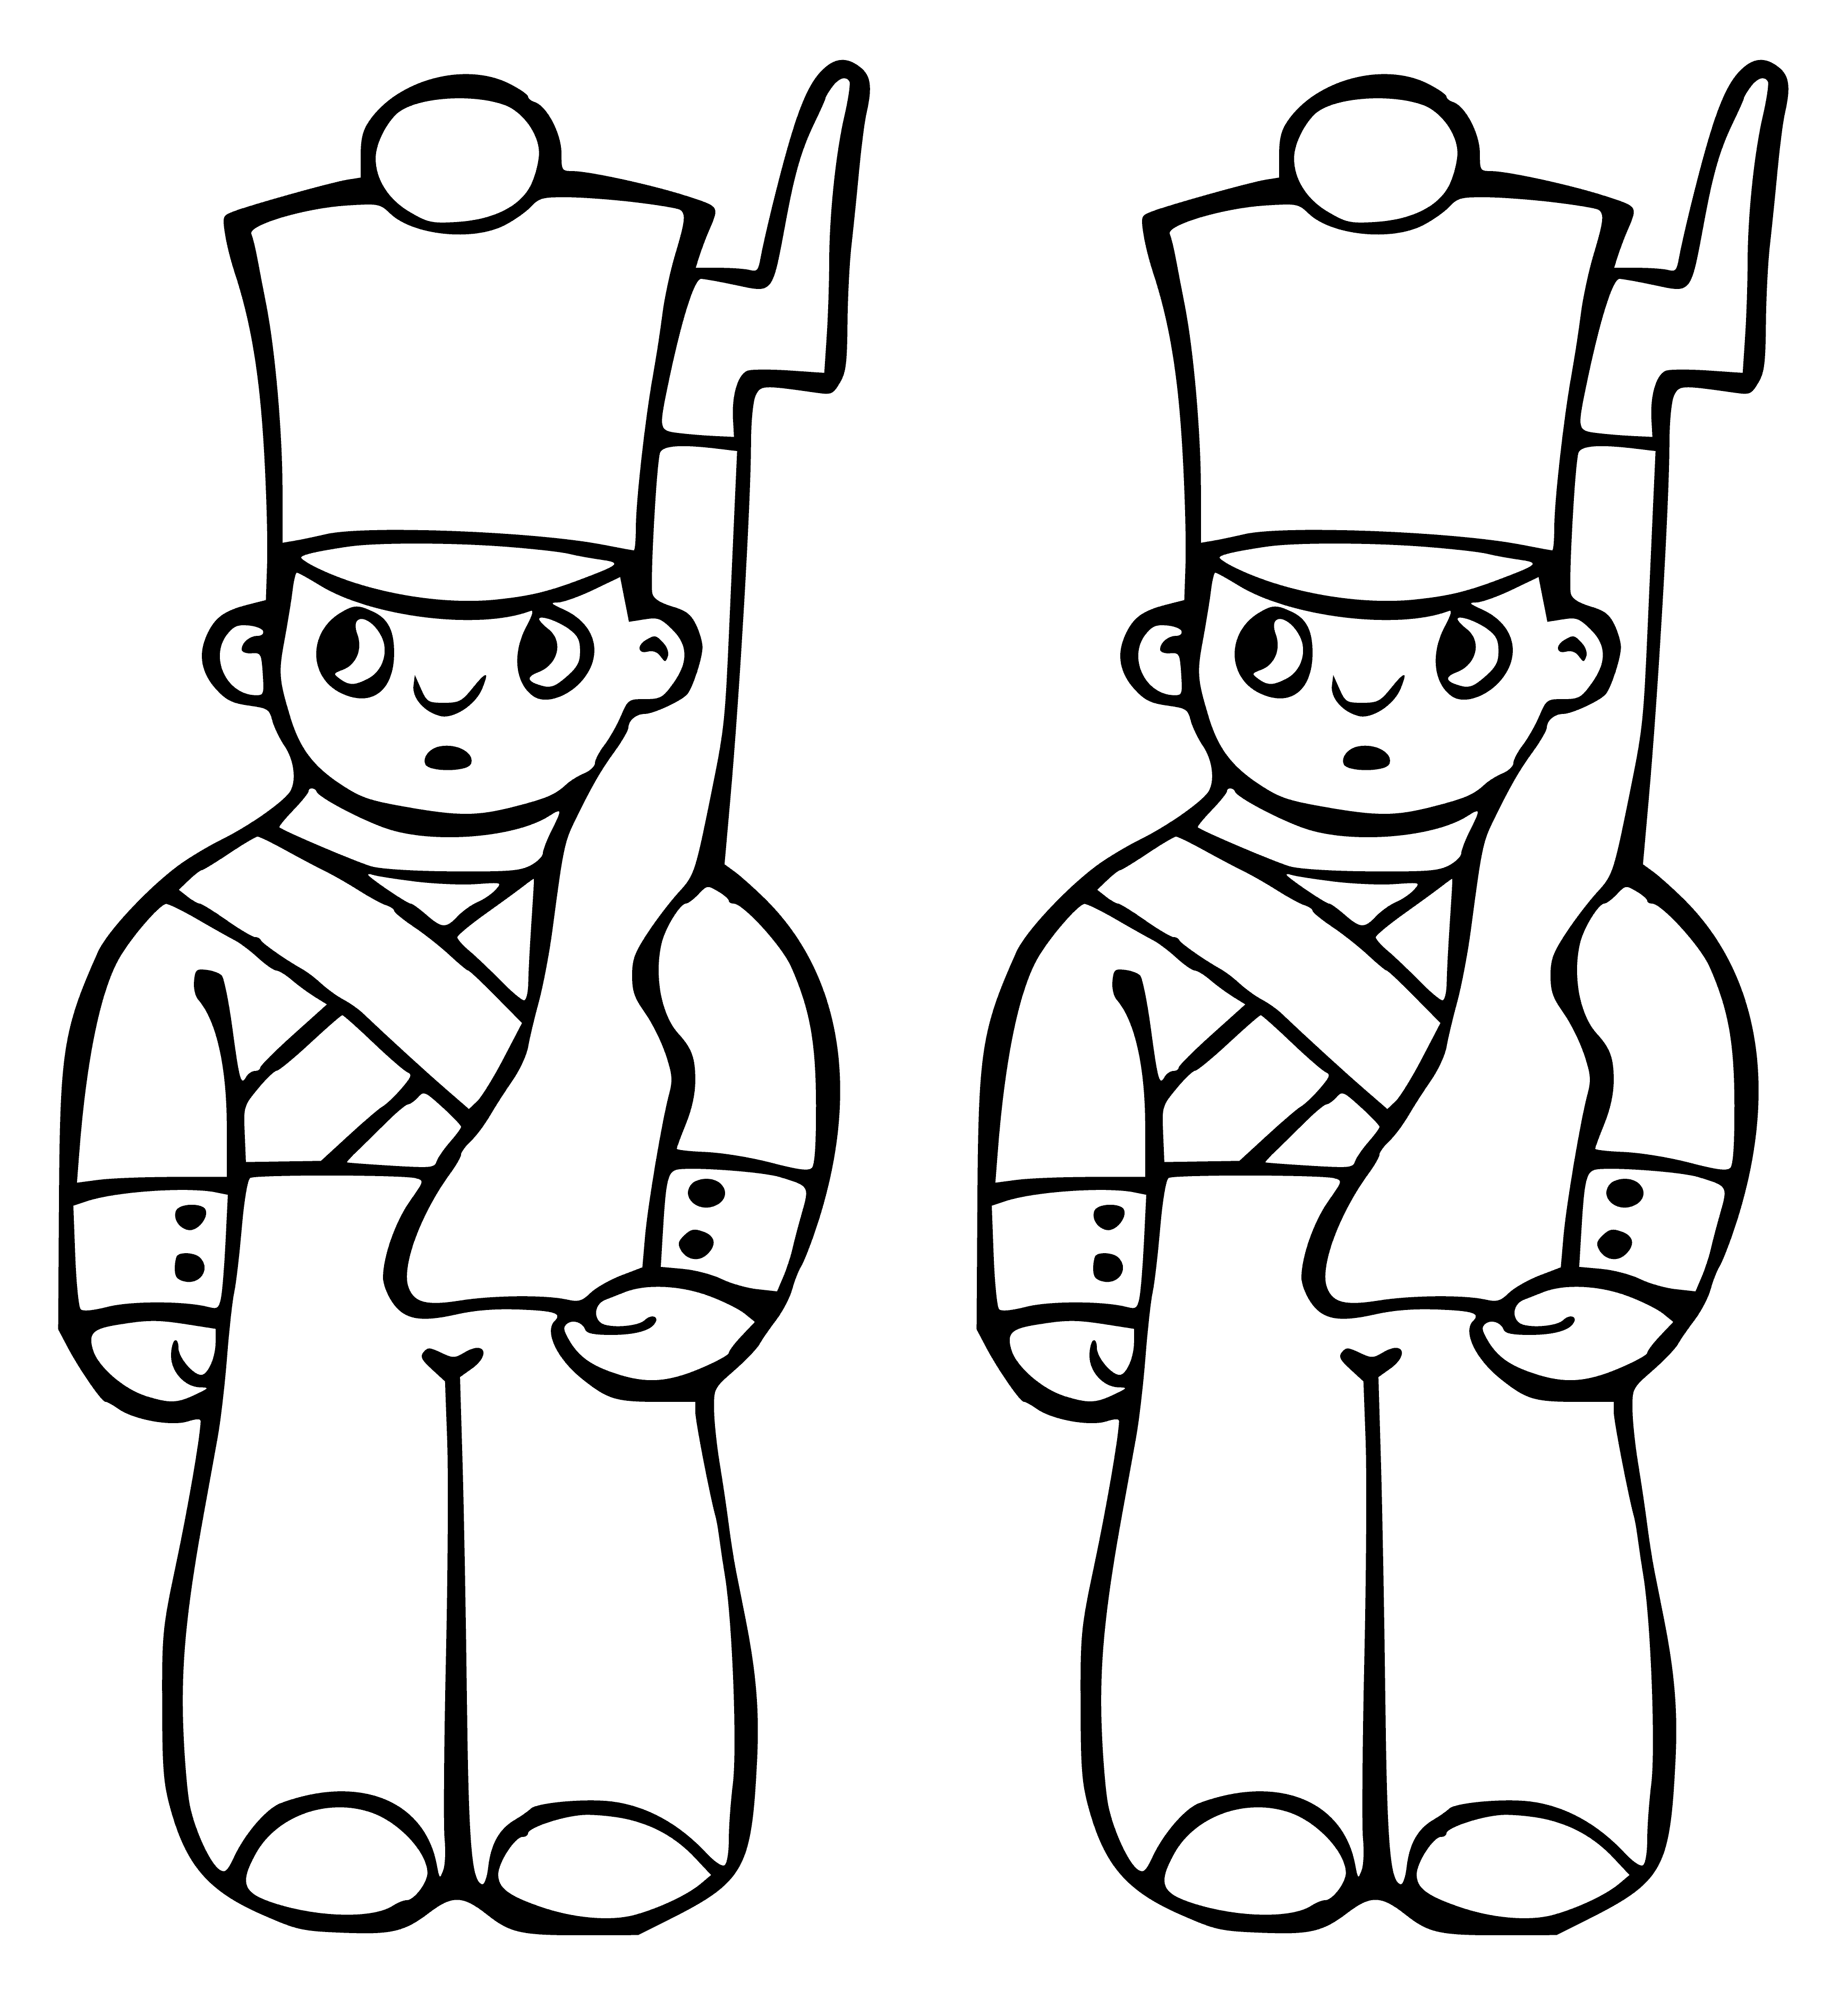 Toy soldiers coloring page